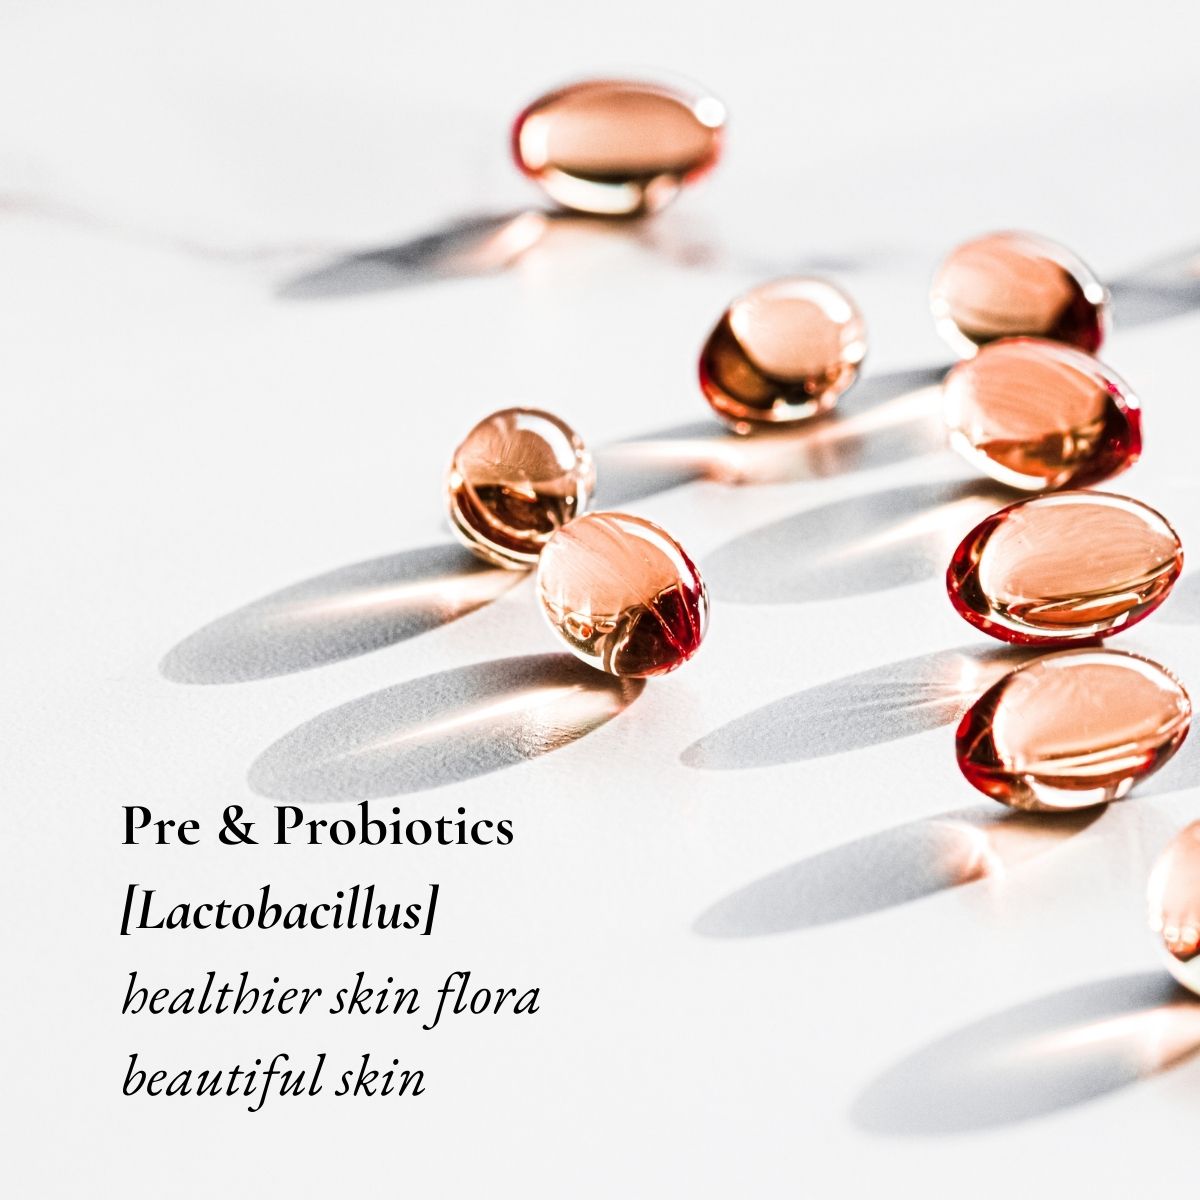 Pre & Probiotics keeps our skin flora healthy and gives us beautiful skin